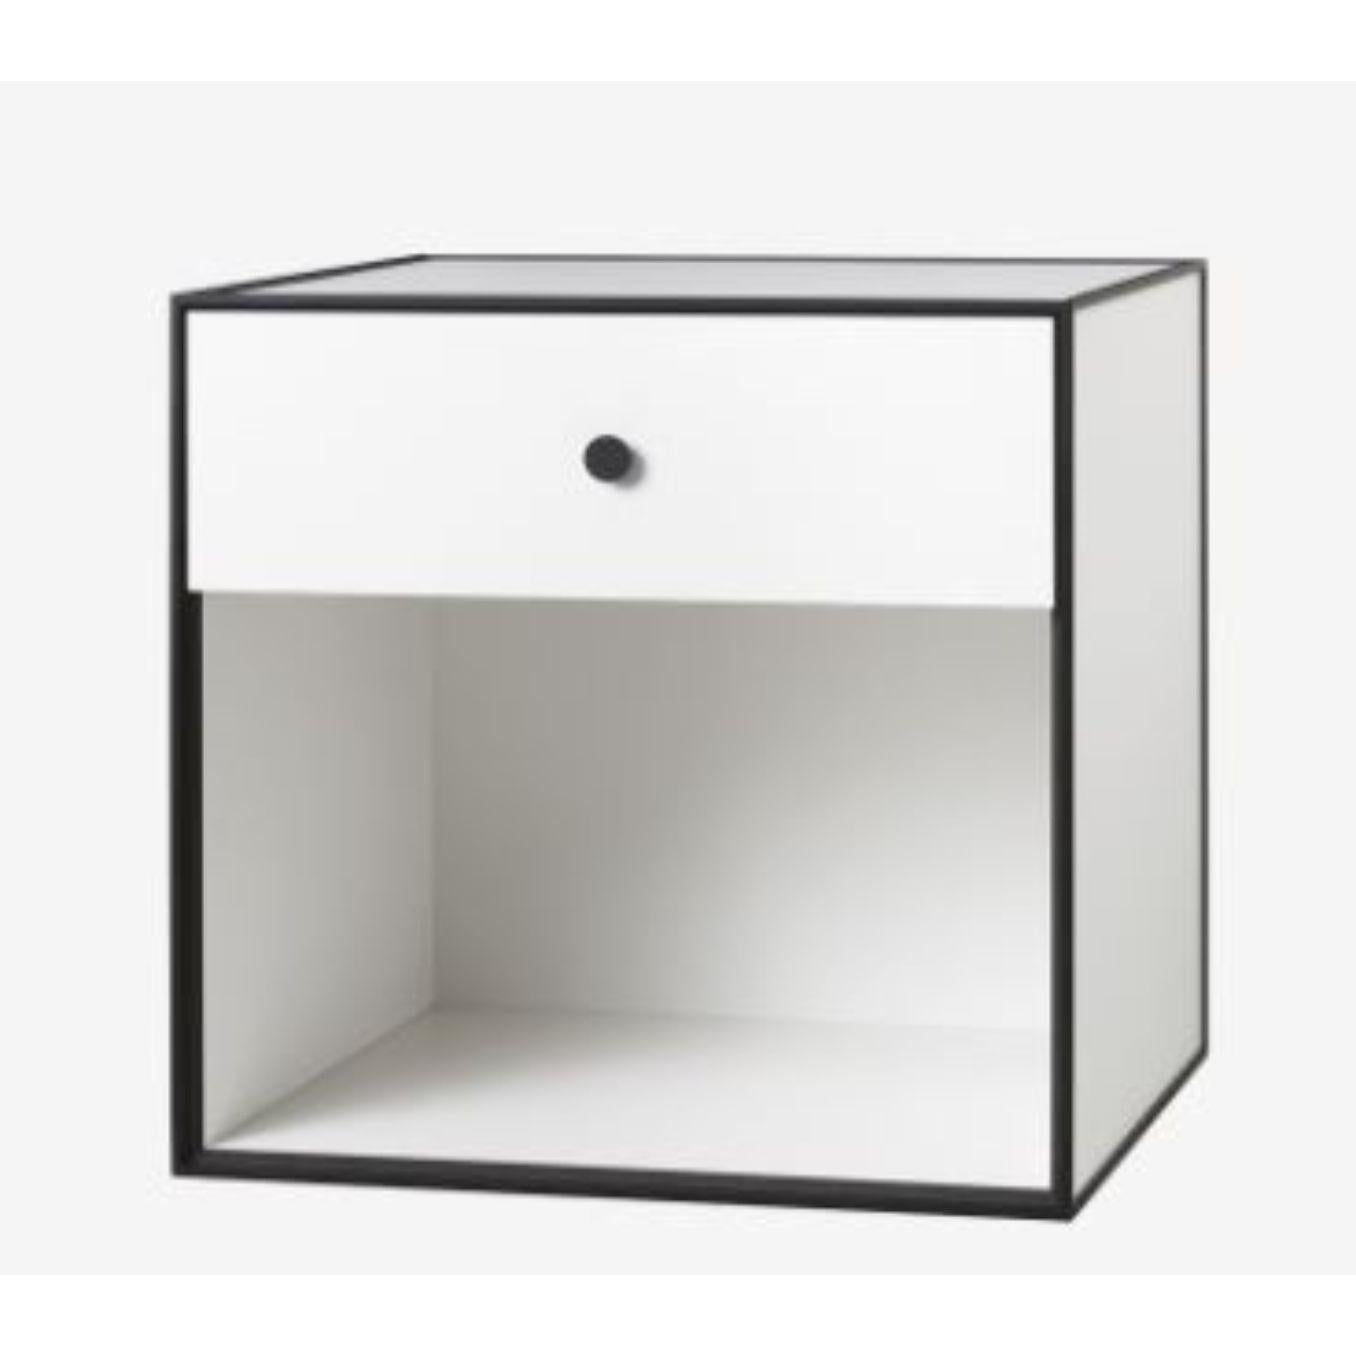 49 White frame box with 1 drawer by Lassen.
Dimensions: D 49 x W 42 x H 49 cm. 
Materials: Finér, Melamin, Melamin, Melamine, Metal, Veneer.
Also available in different colours and dimensions. 
Weight: 15 Kg.


By Lassen is a Danish design